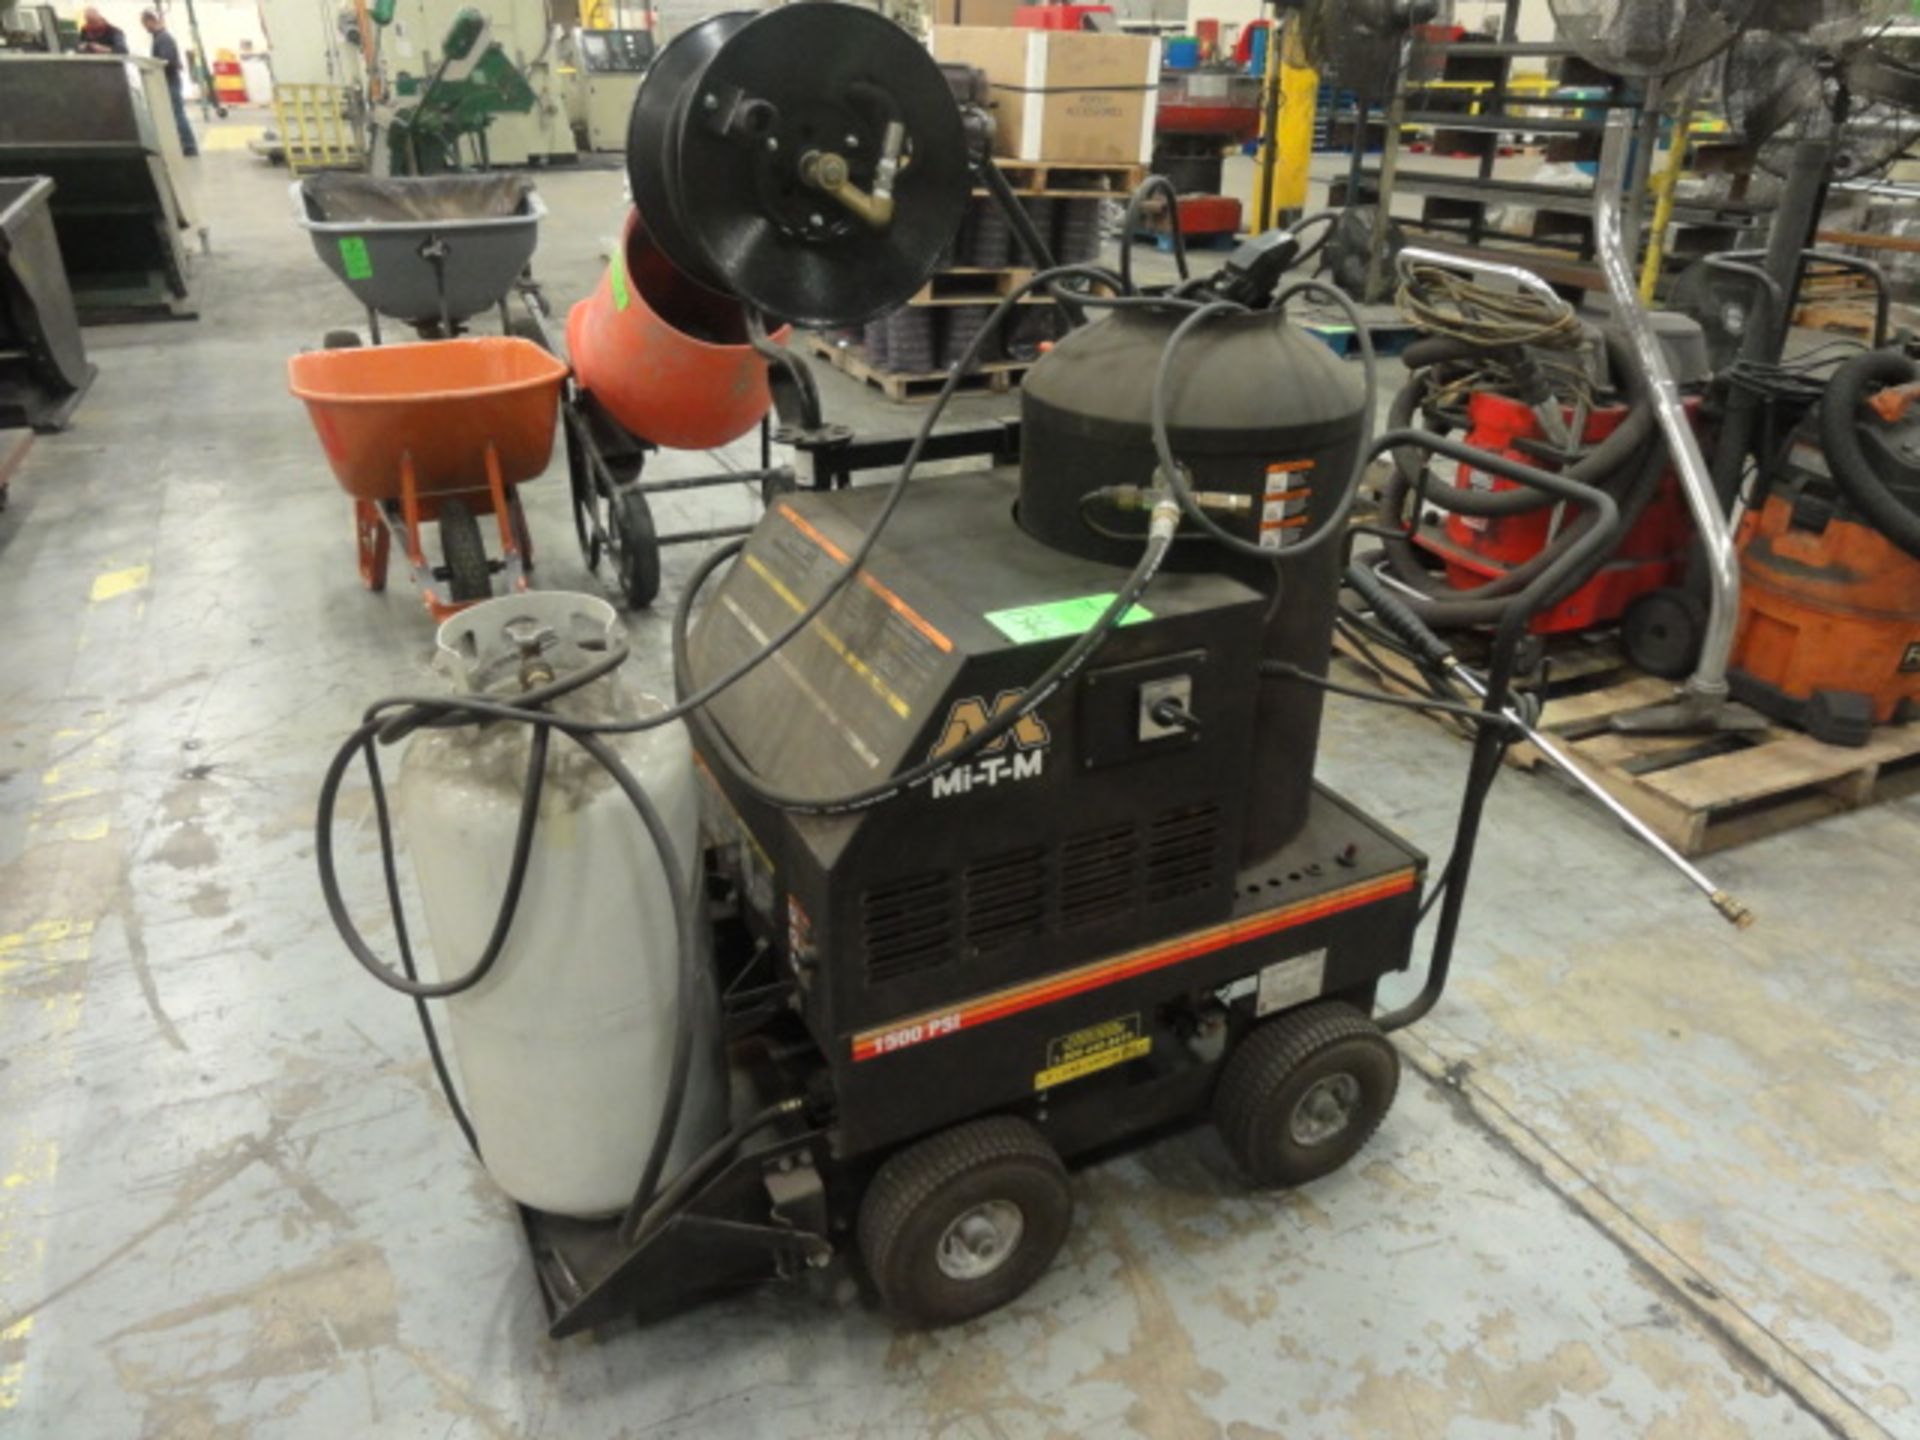 Mi-T-M 1500 PSI LP Gas Heated Pressure Washer Model GH-1502-LM10, S/N 15057983, w/ Retracting Nozzle